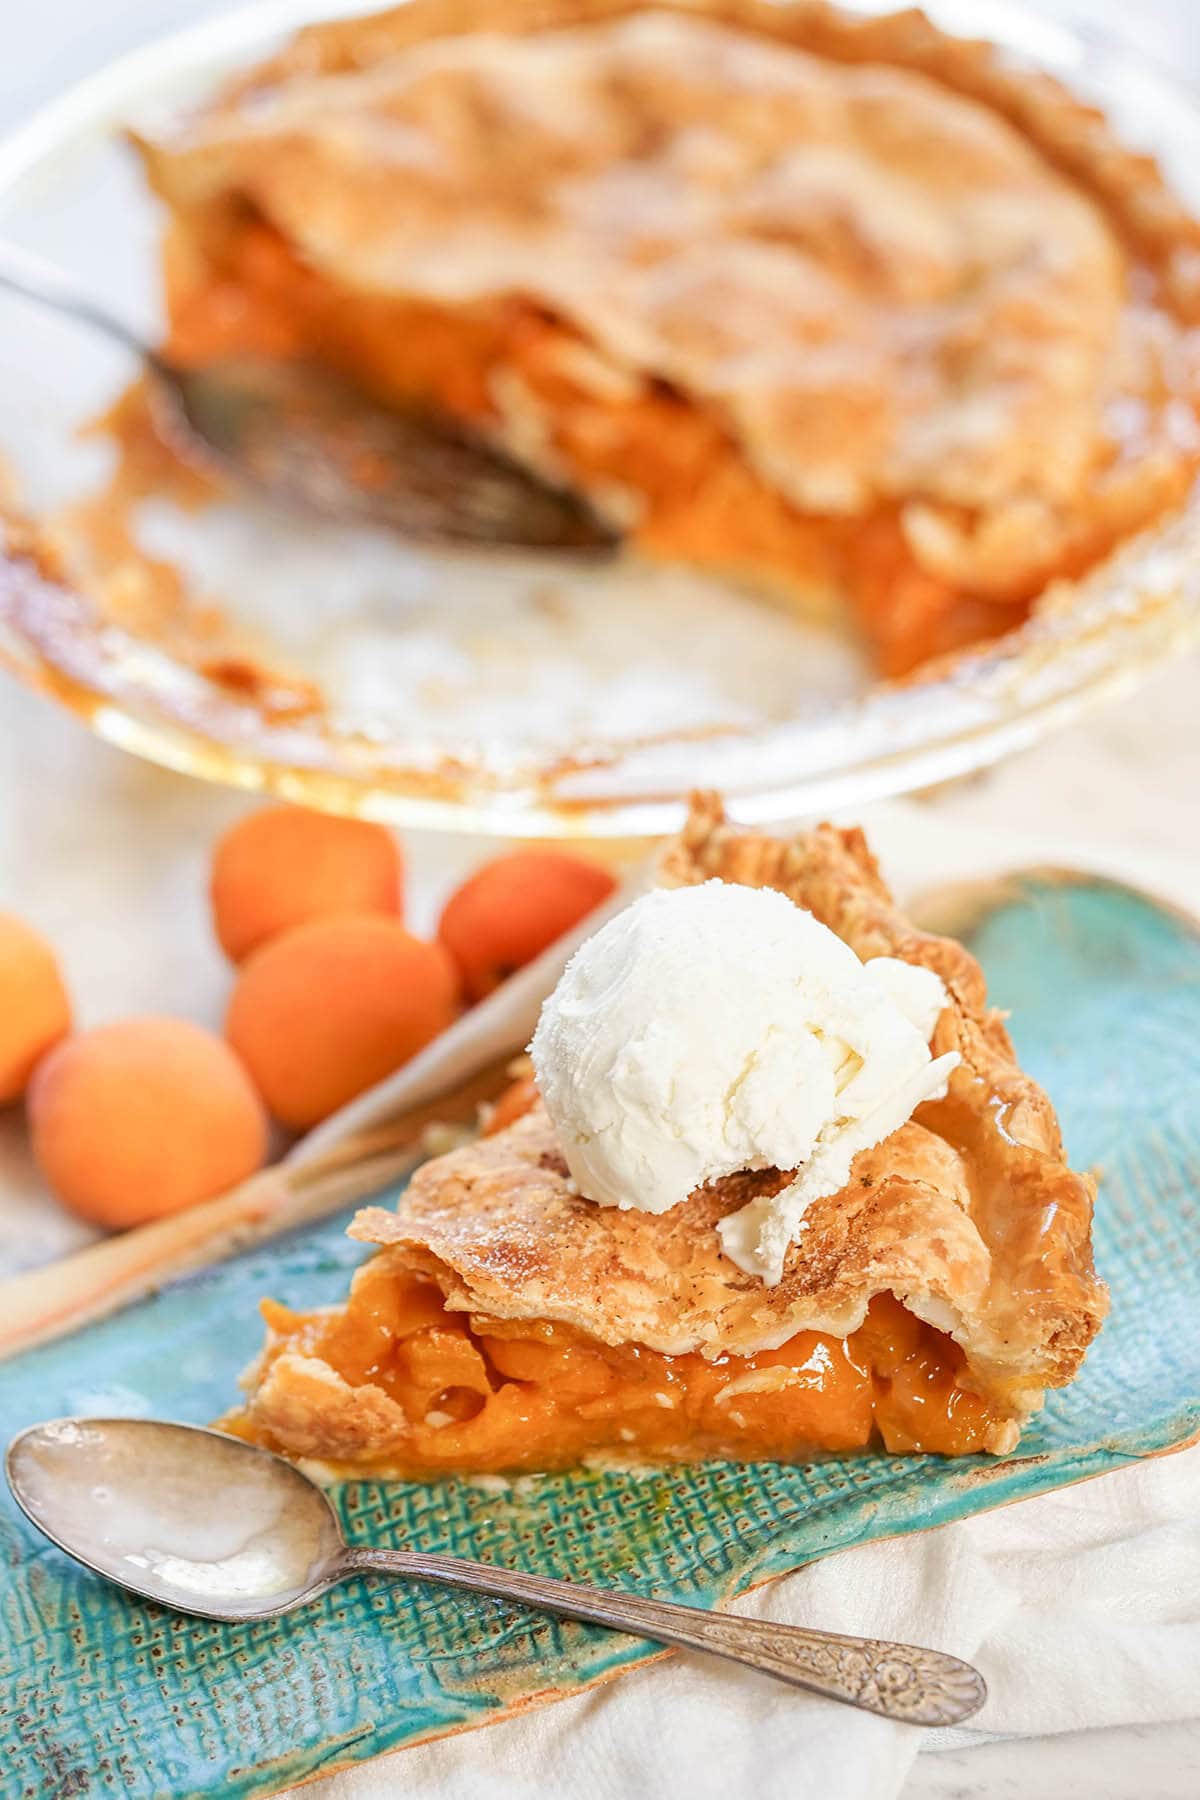 Sliced Pie on plate with spoon. Pie is topped with a scoop of ice cream. 